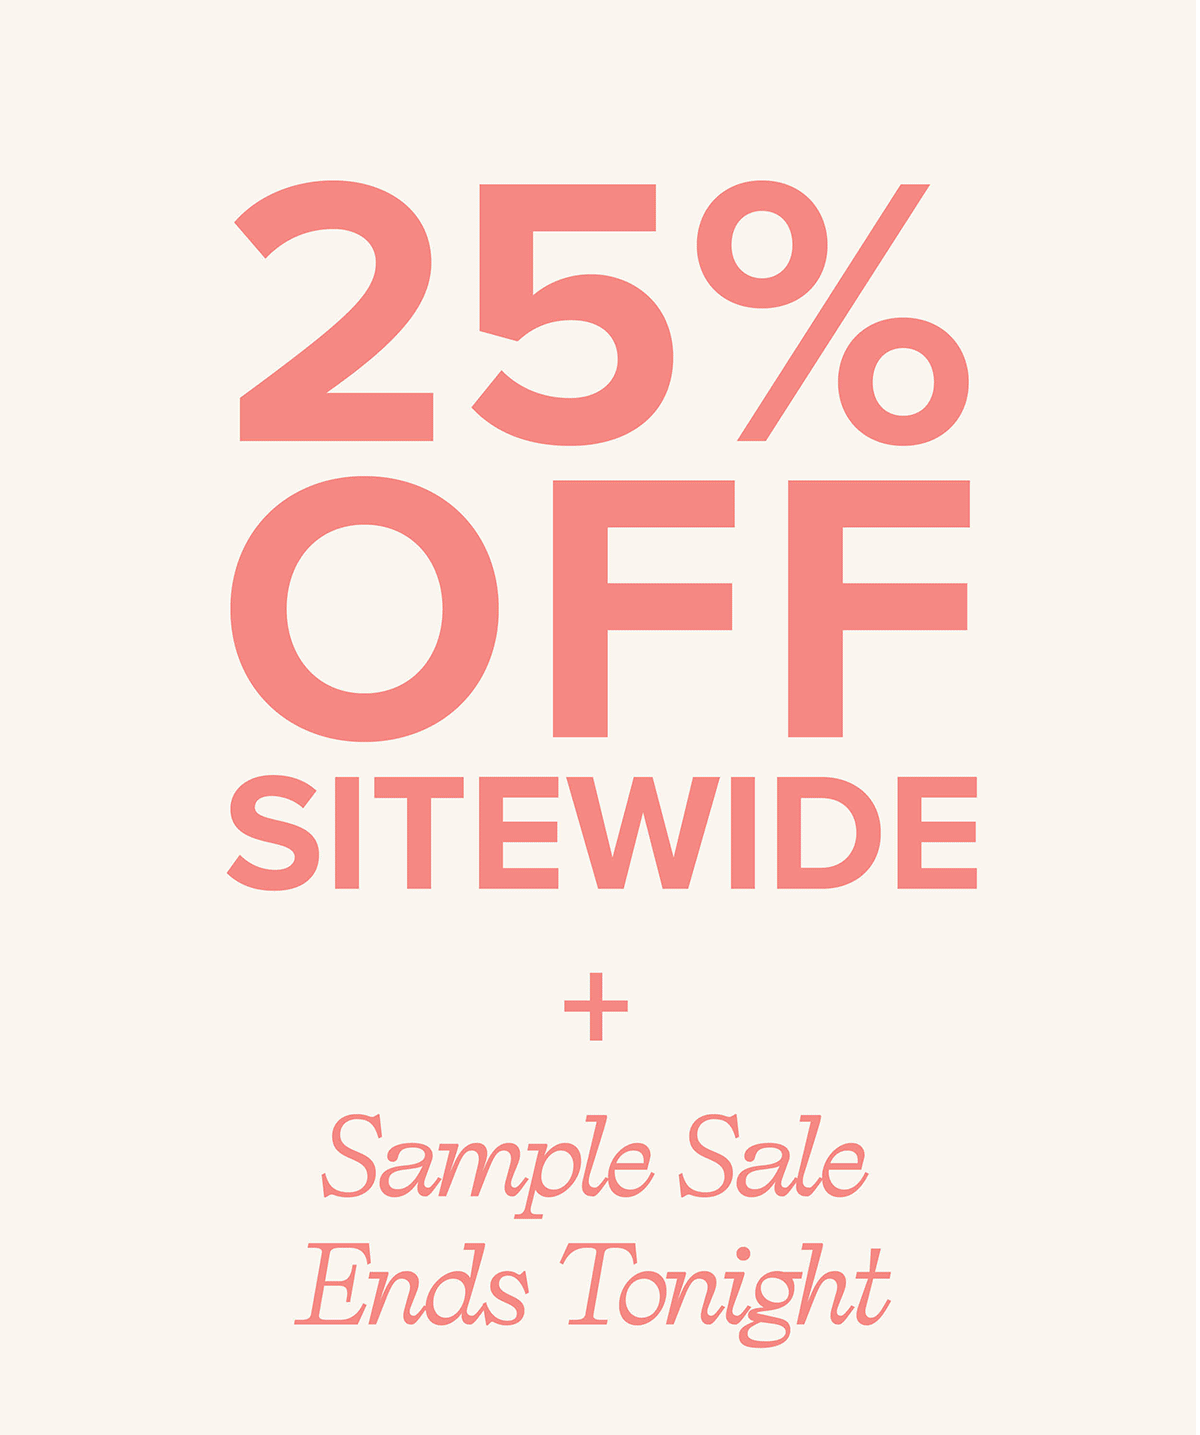 Get 25% off everything on site